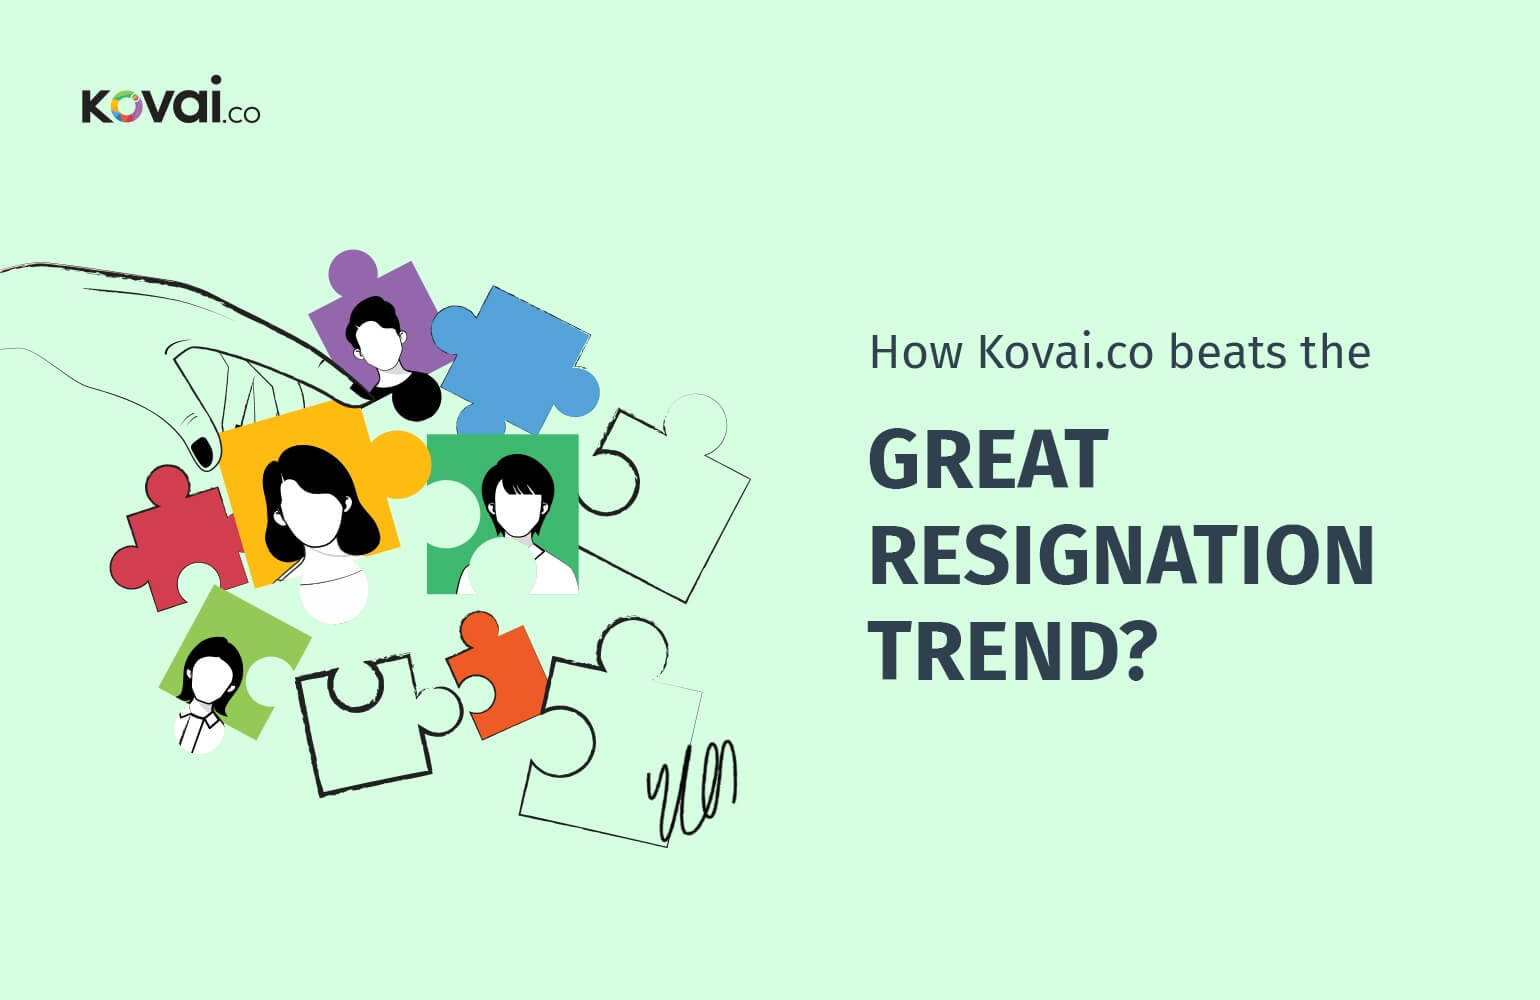 How Kovai.co beats the great resignation trend?